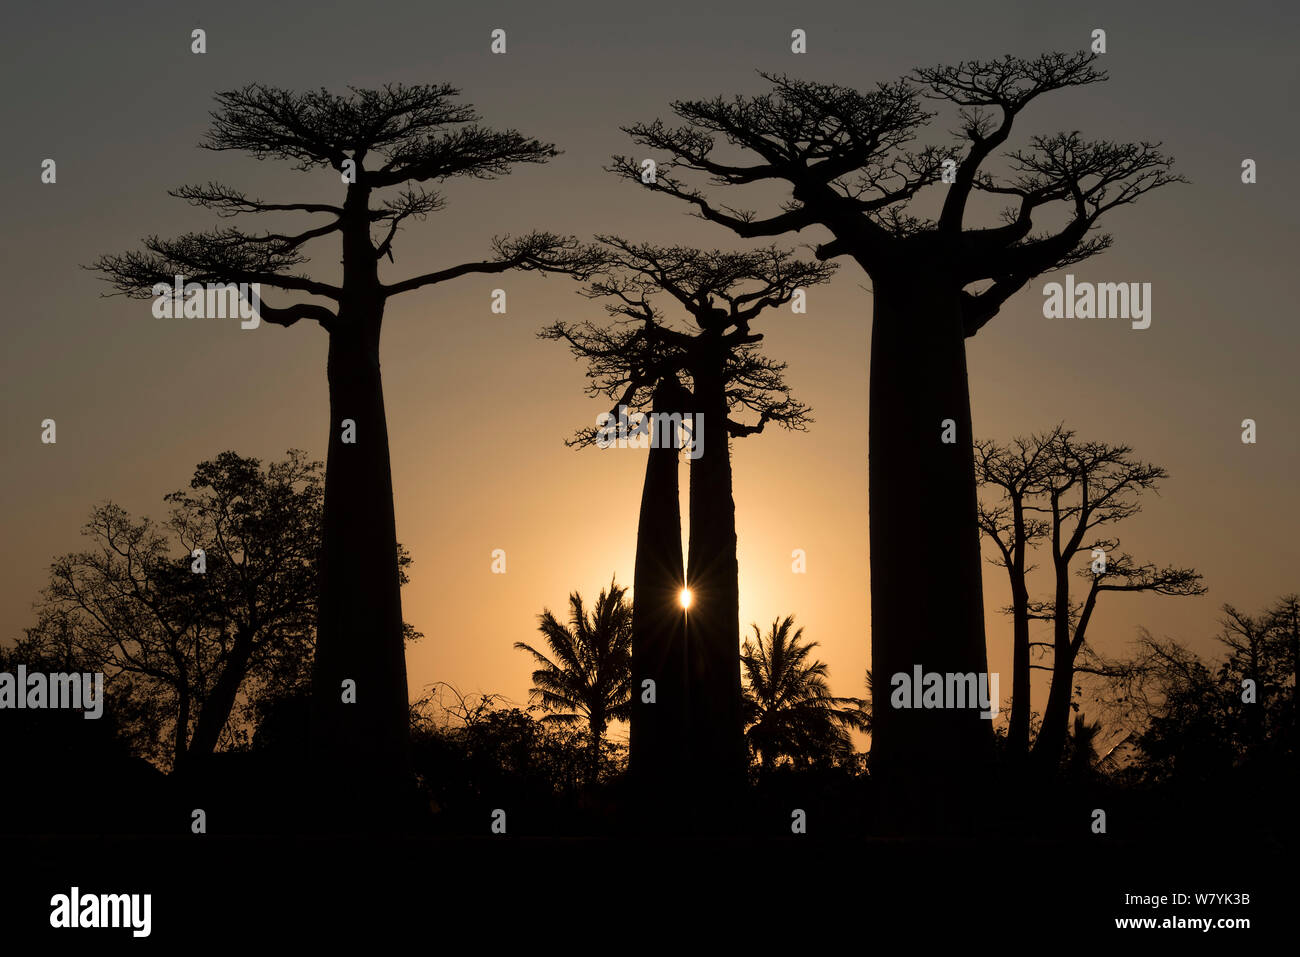 Boababs (Adansonia grandidieri) silhouetted at sunset, Allee des Baobabs / Avenue of the Baobabs , Morondave, Madagascar. Stock Photo